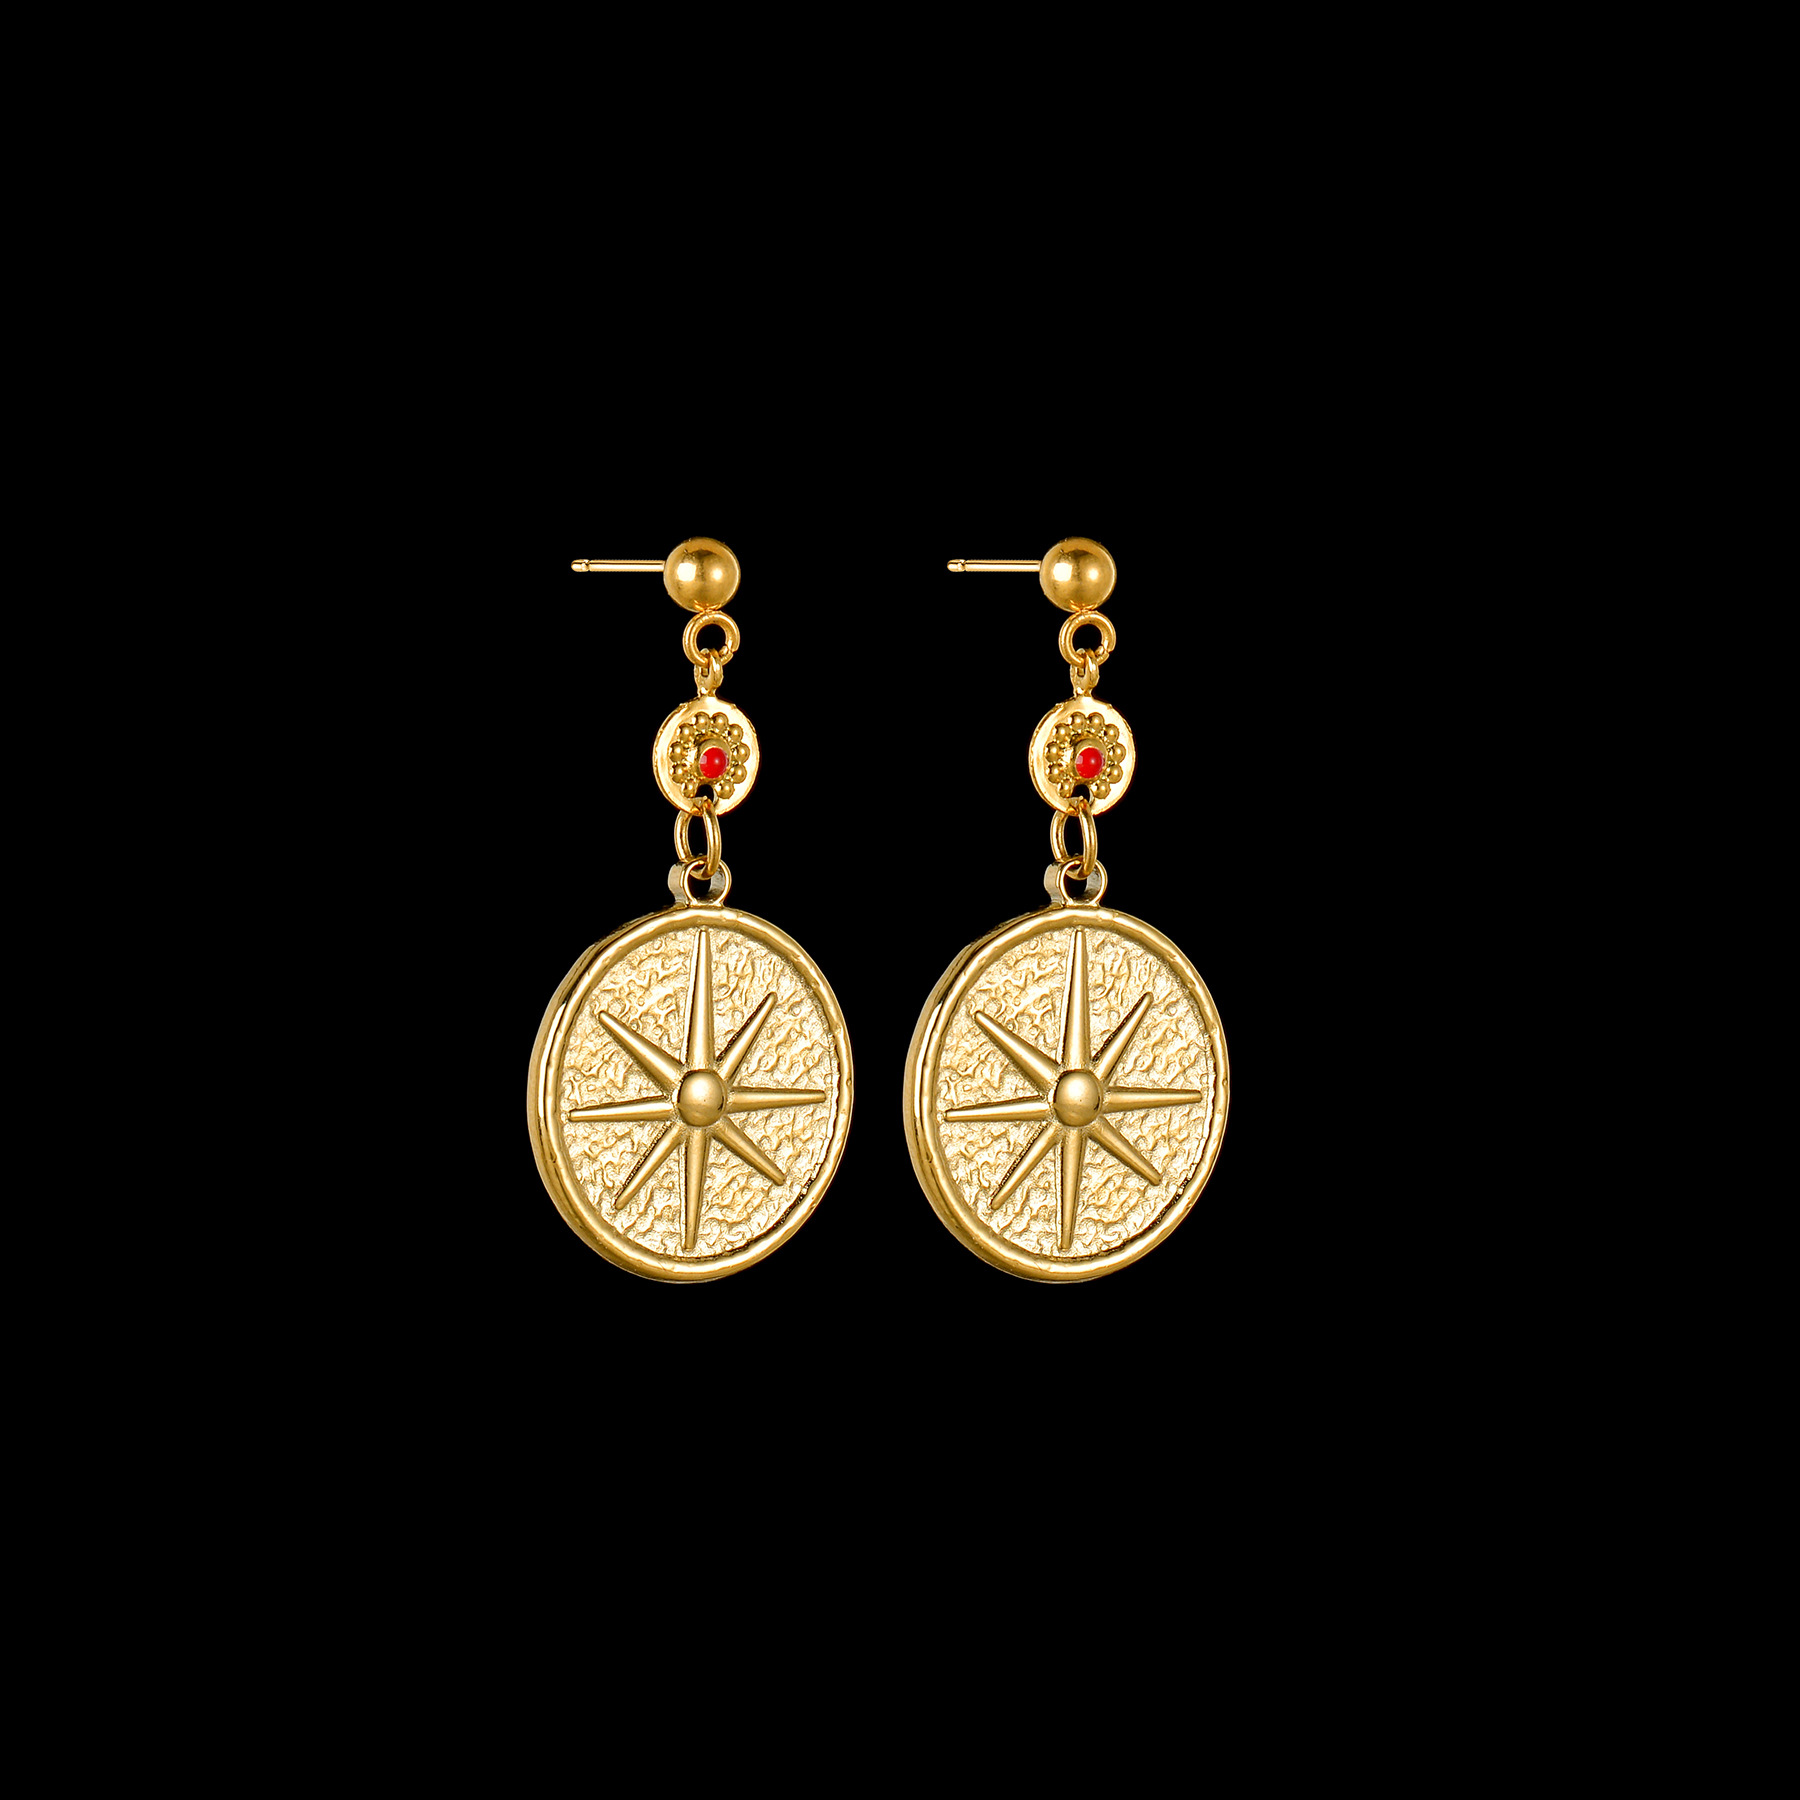 Eight-pointed star earrings